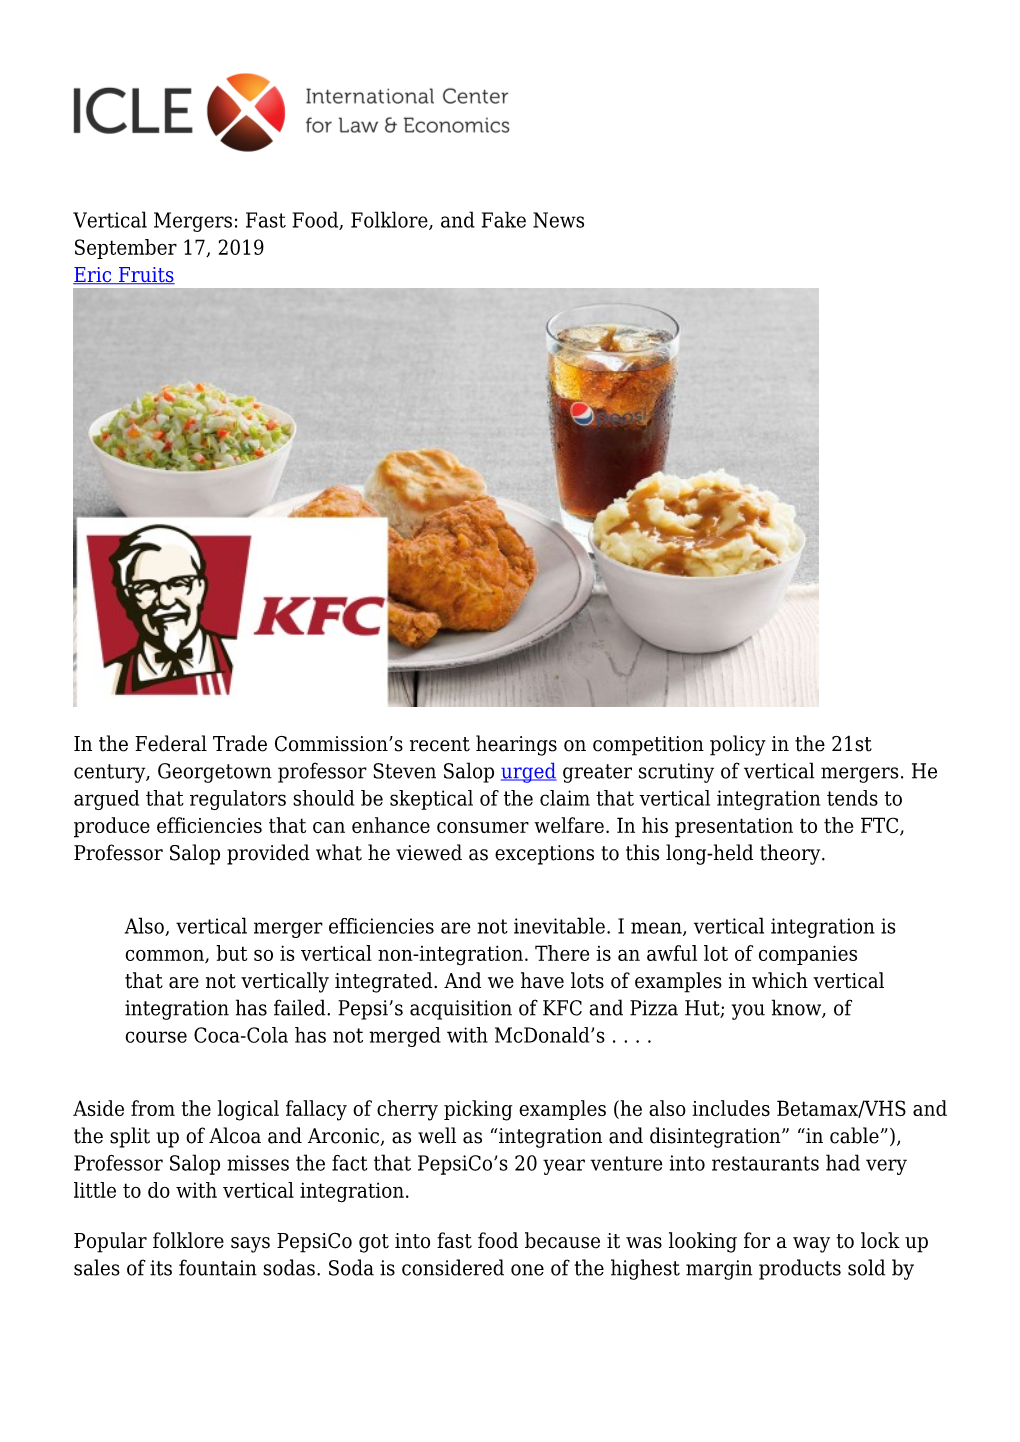 Vertical Mergers: Fast Food, Folklore, and Fake News September 17, 2019 Eric Fruits